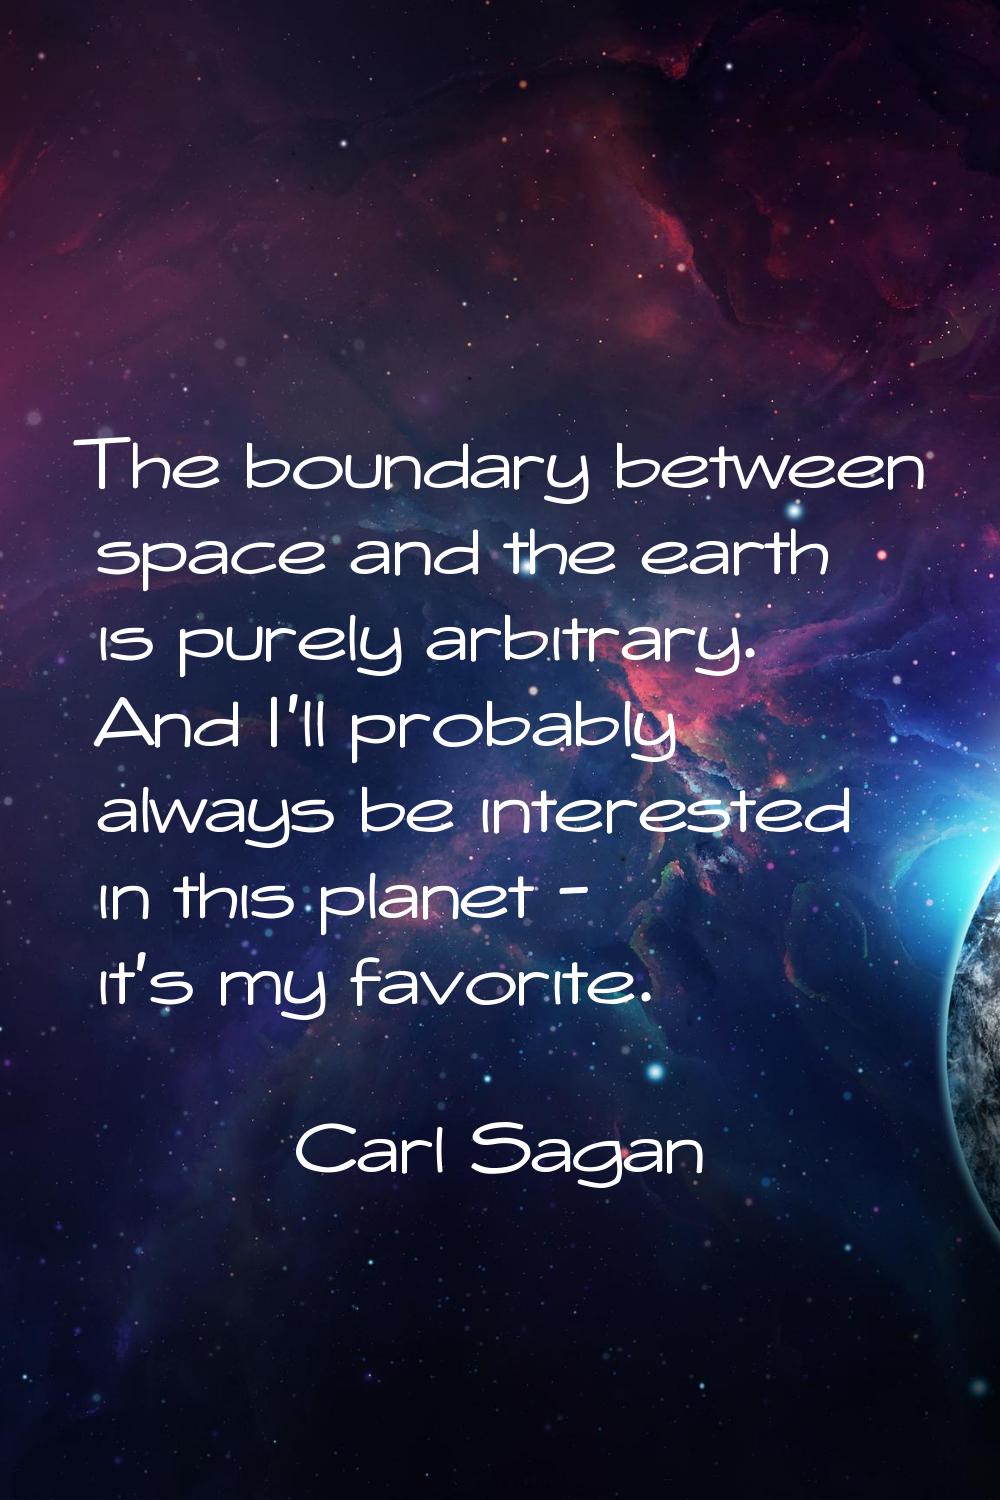 The boundary between space and the earth is purely arbitrary. And I'll probably always be intereste